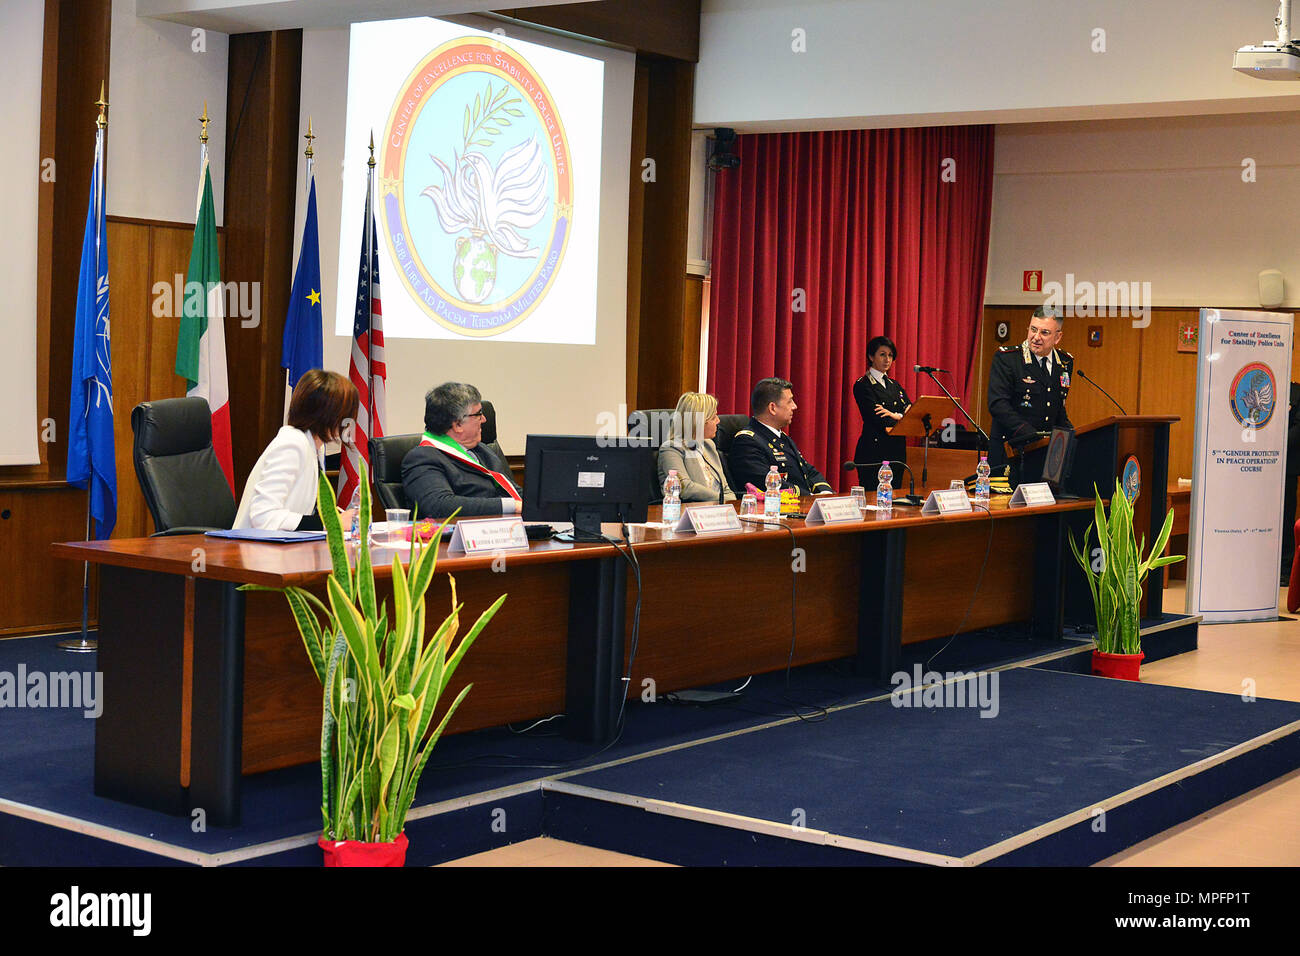 Brig. Gen. Giovanni Pietro Barbano , Center of Excellence for Stability Police Units (CoESPU) director, address attendees of the opening ceremony of the 5th “Gender Protection in Peace Operations” Course at the  CoESPU in Vicenza, Italy, Mar. 8, 2017. The event brought together military and civic leaders of the local community and offered the opportunity to celebrate International Women's Day. (U.S. Army Photo by Visual Information Specialist Paolo Bovo/released) Stock Photo